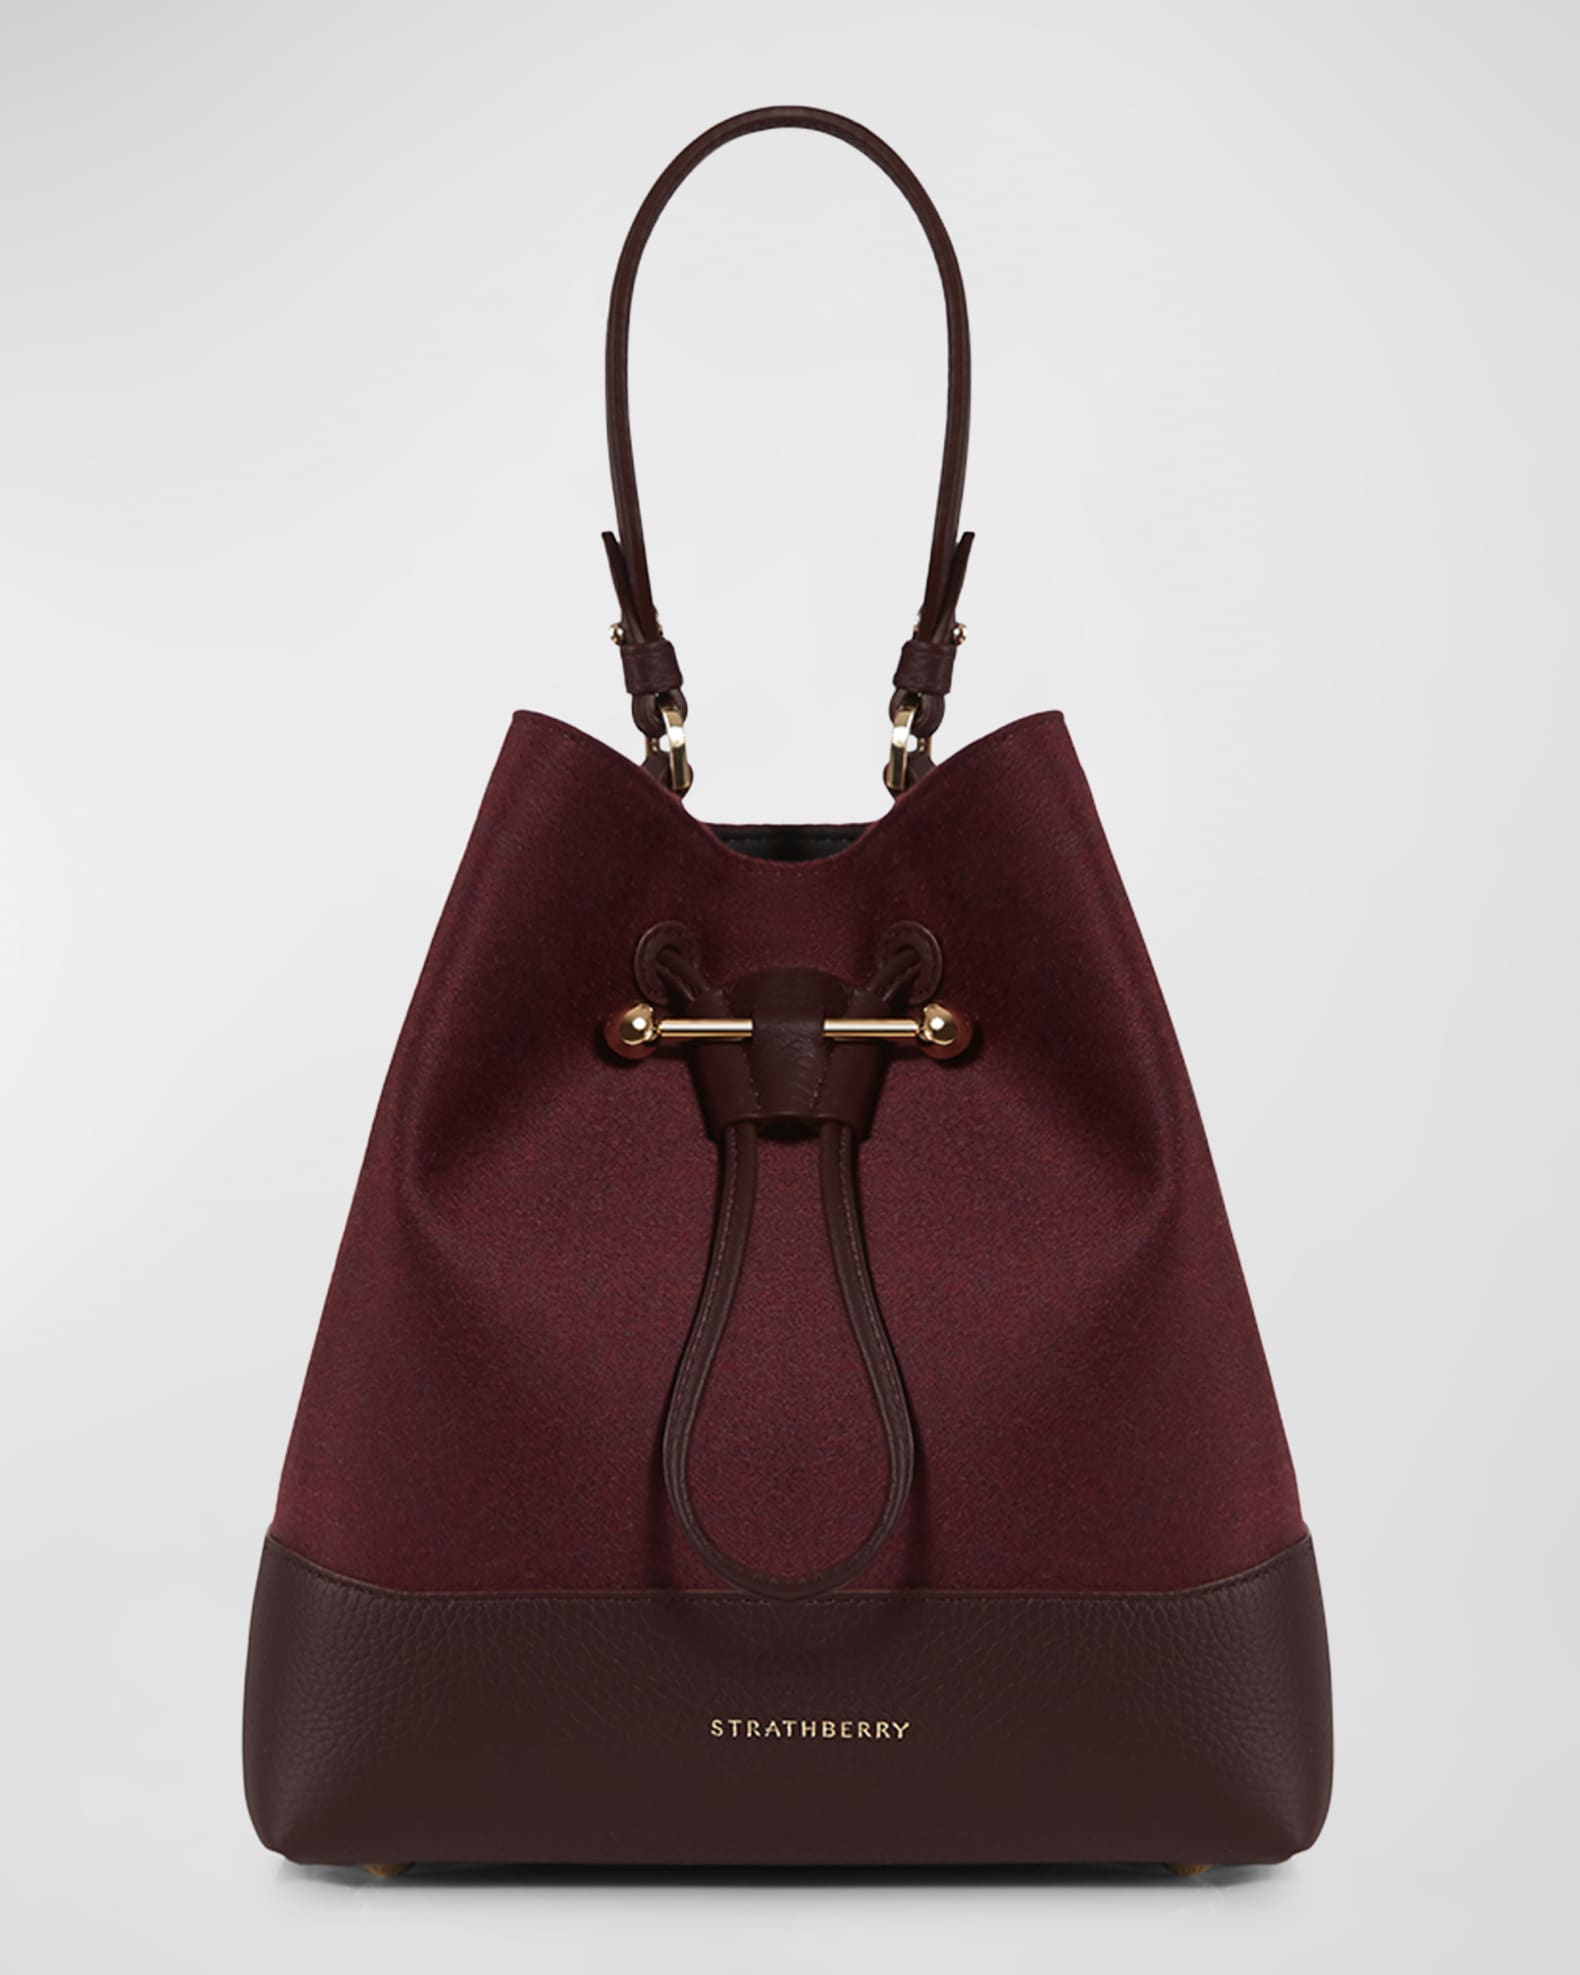 Women's Bucket Bags at Strathberry - Bags